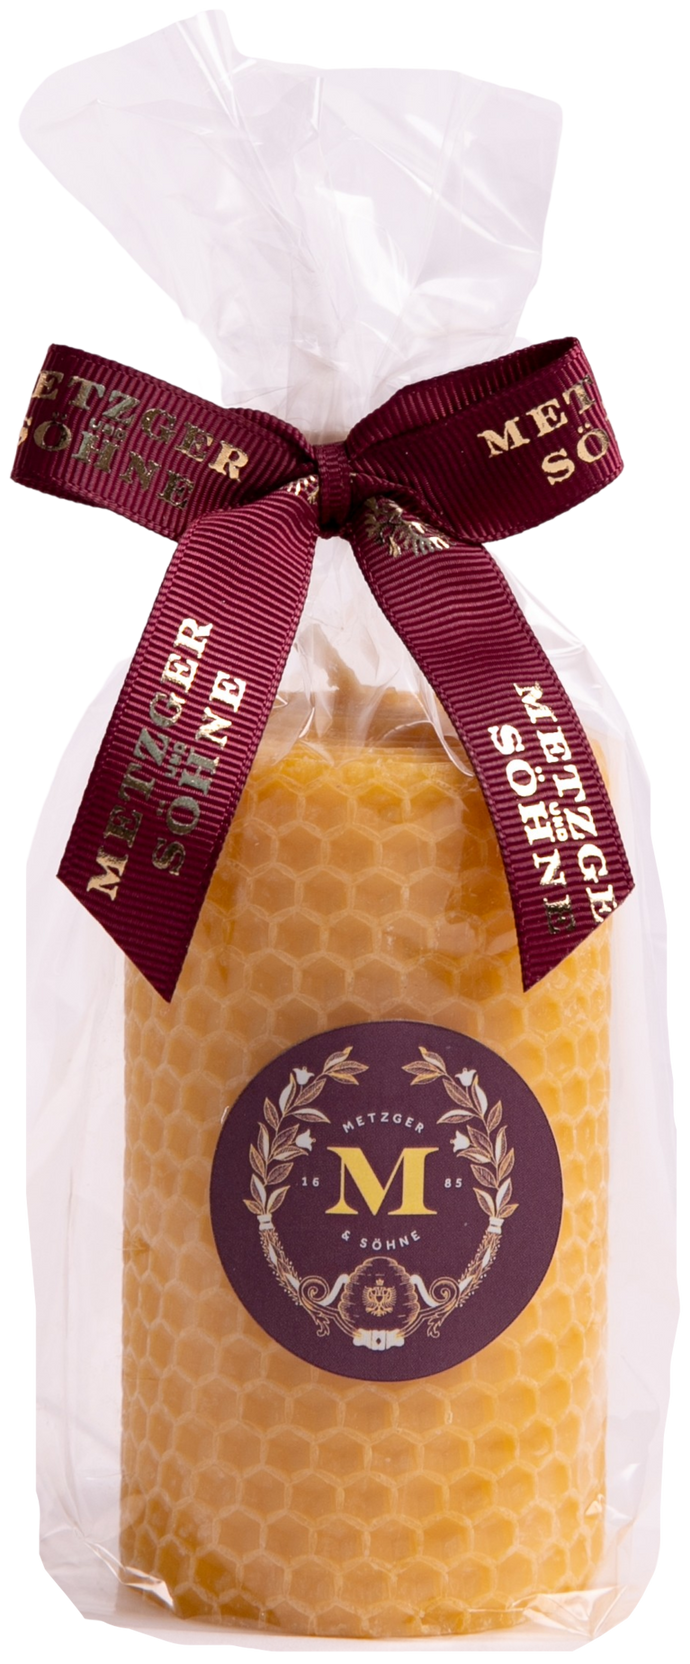 100% beeswax candle rolled from beeswax honeycomb board. Beeswax is a pure natural product, produced by honey bees.